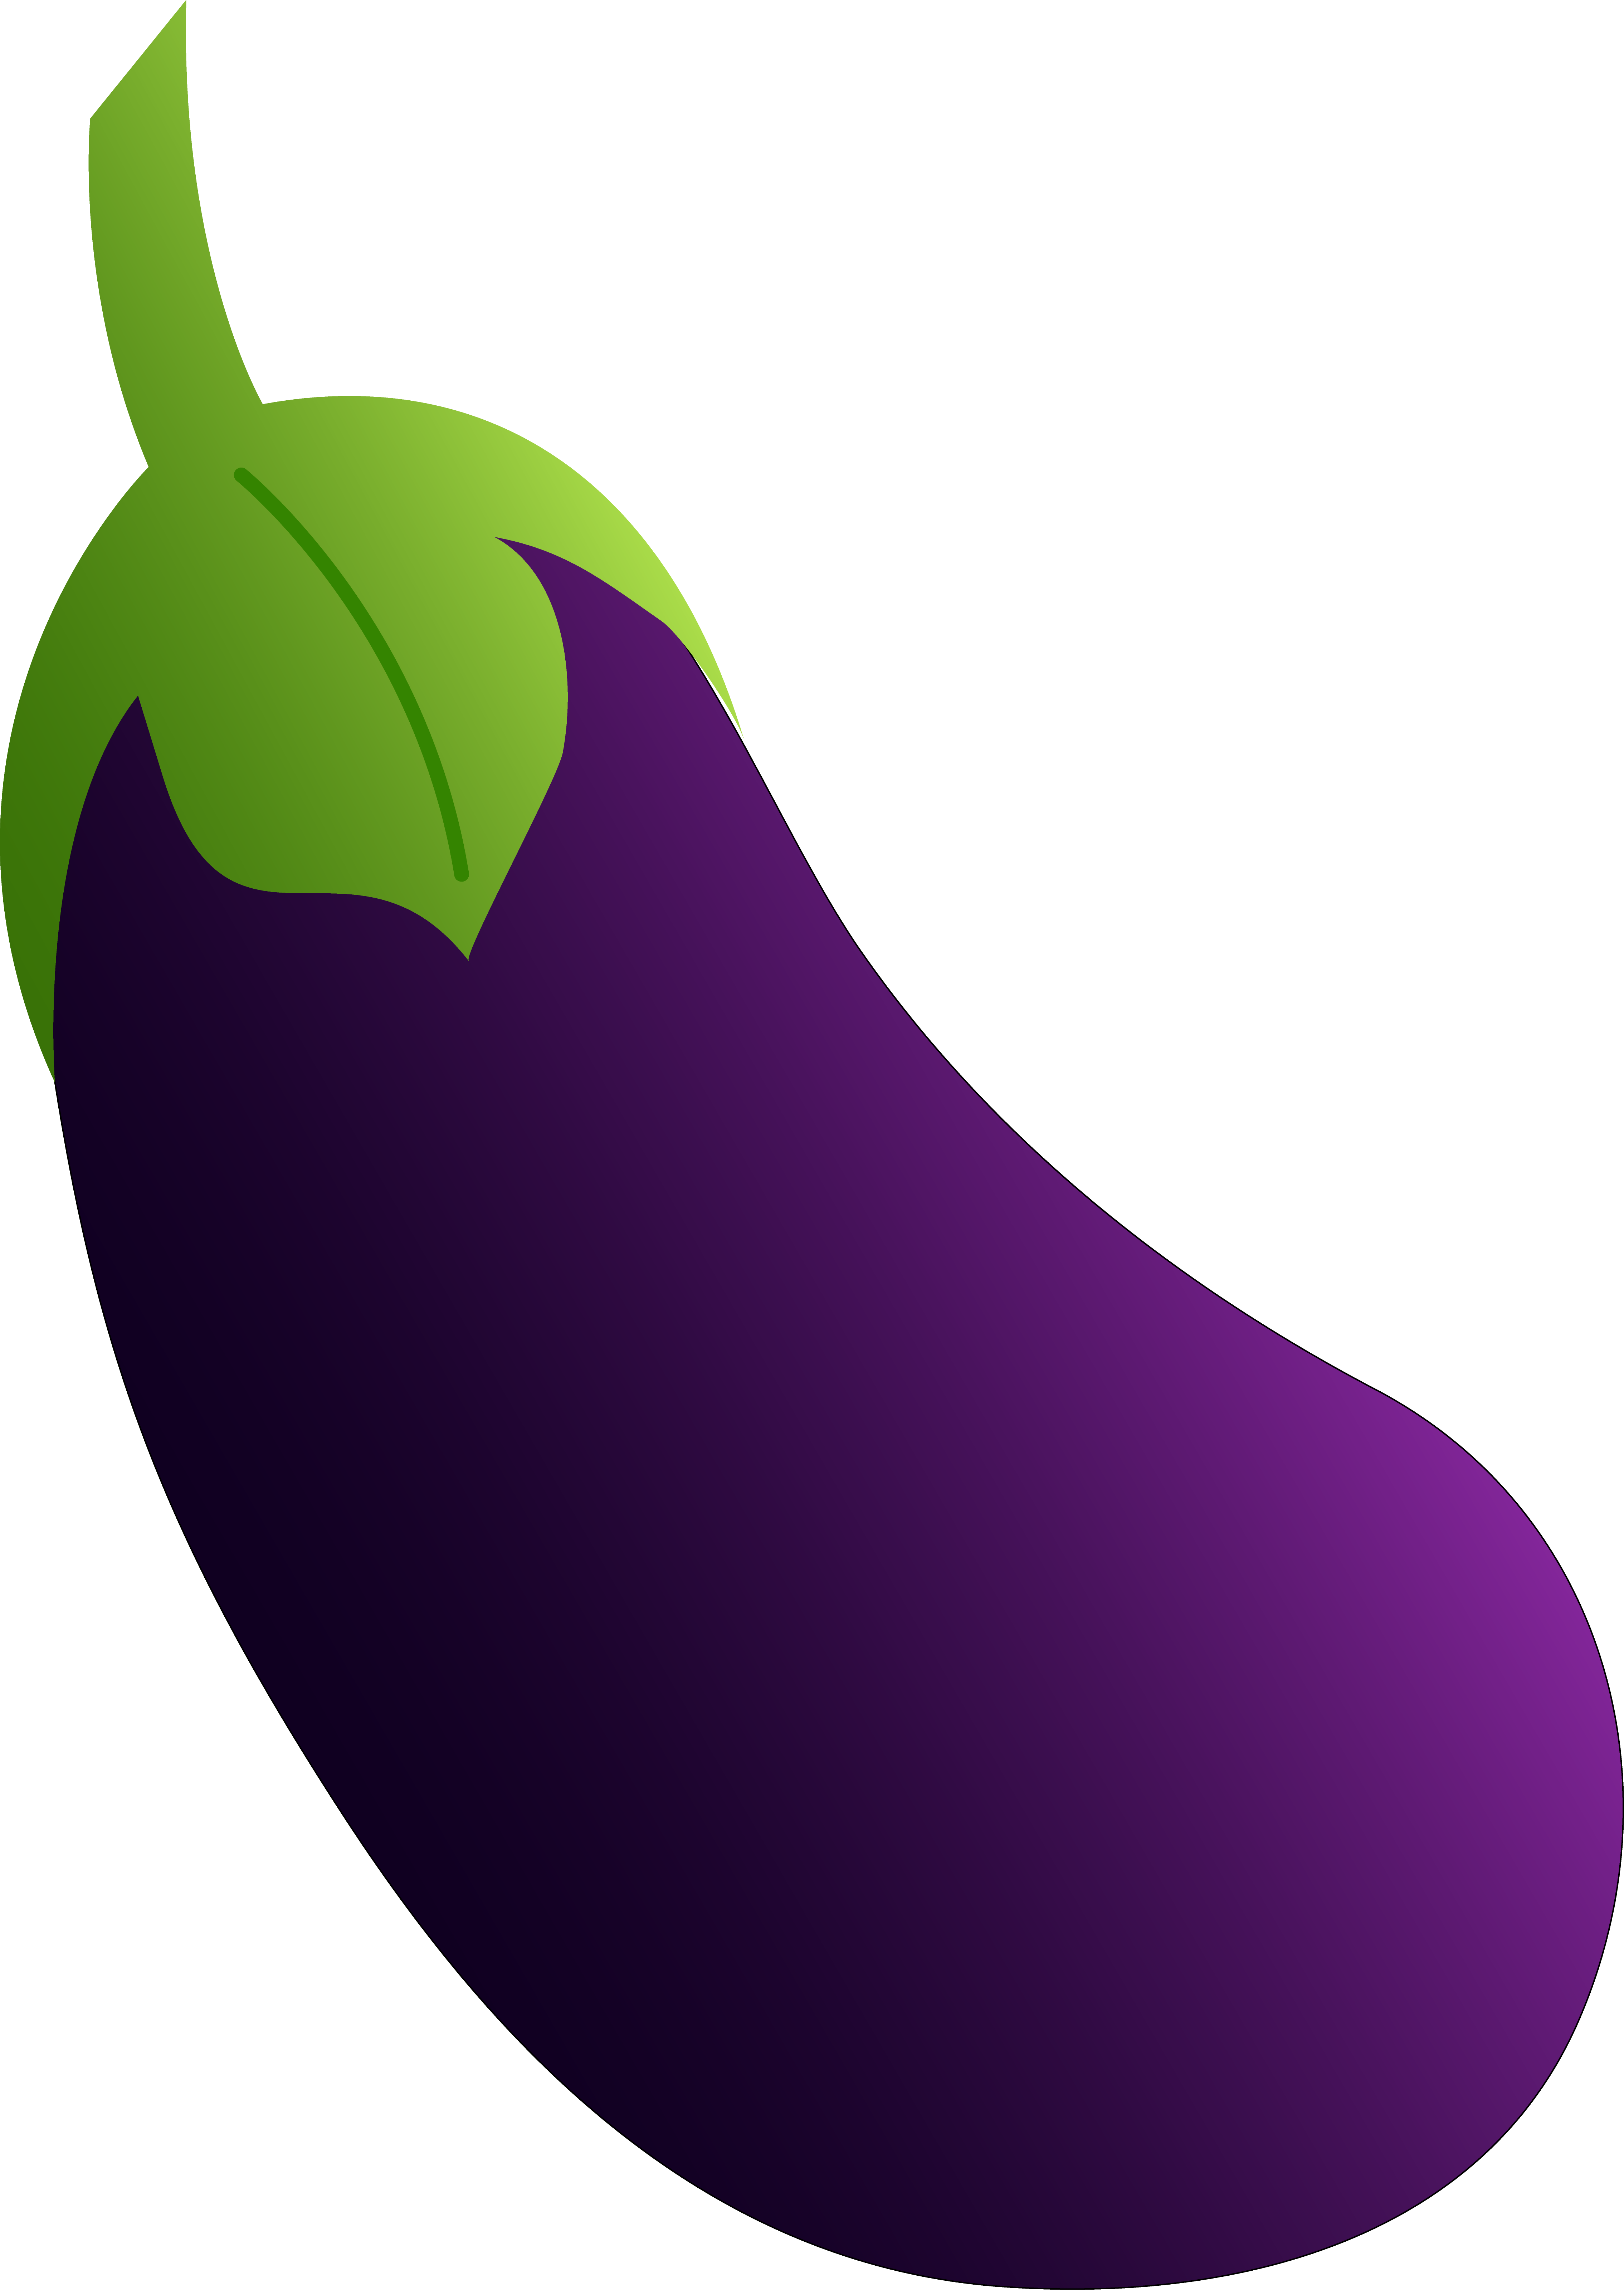 Free Brinjal Clipart Black And White, Download Free Brinjal Clipart